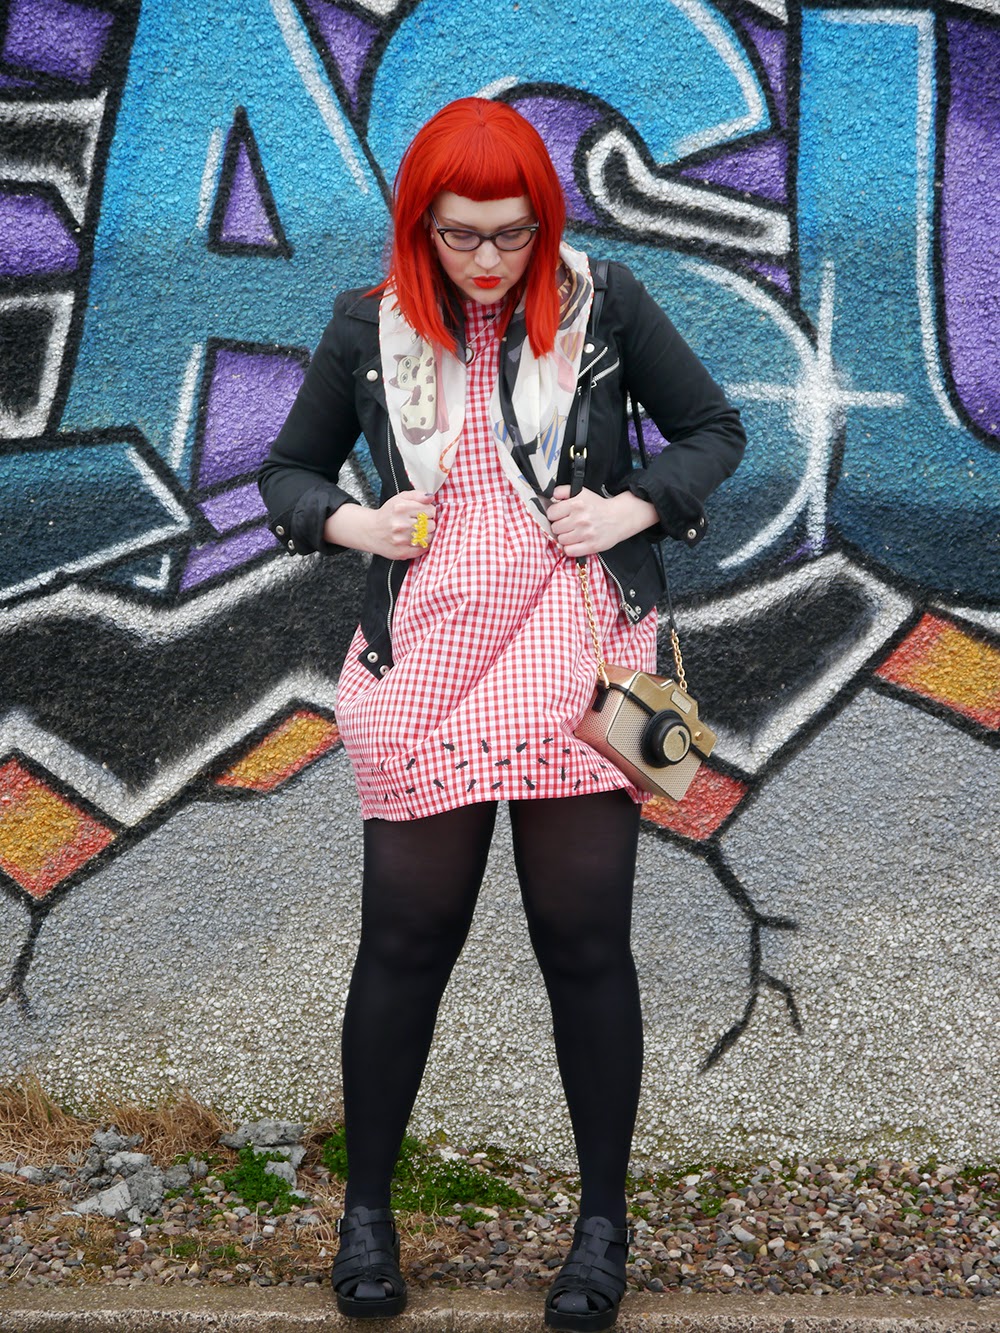 Blogging duo, Scottish blogging duo, Scottish bloggers, twin styling, red wig, ginger wig, cat eye glasses, Vintage Style Me gingham dress, Karen Mabon bull in a china shop scarf, H&M biker style jacket, Bonnie Bling name ring, Helen's style, Blog birthday, style challenge, Sugar & Vice cherry bakewell necklace, Accessorize camera bag